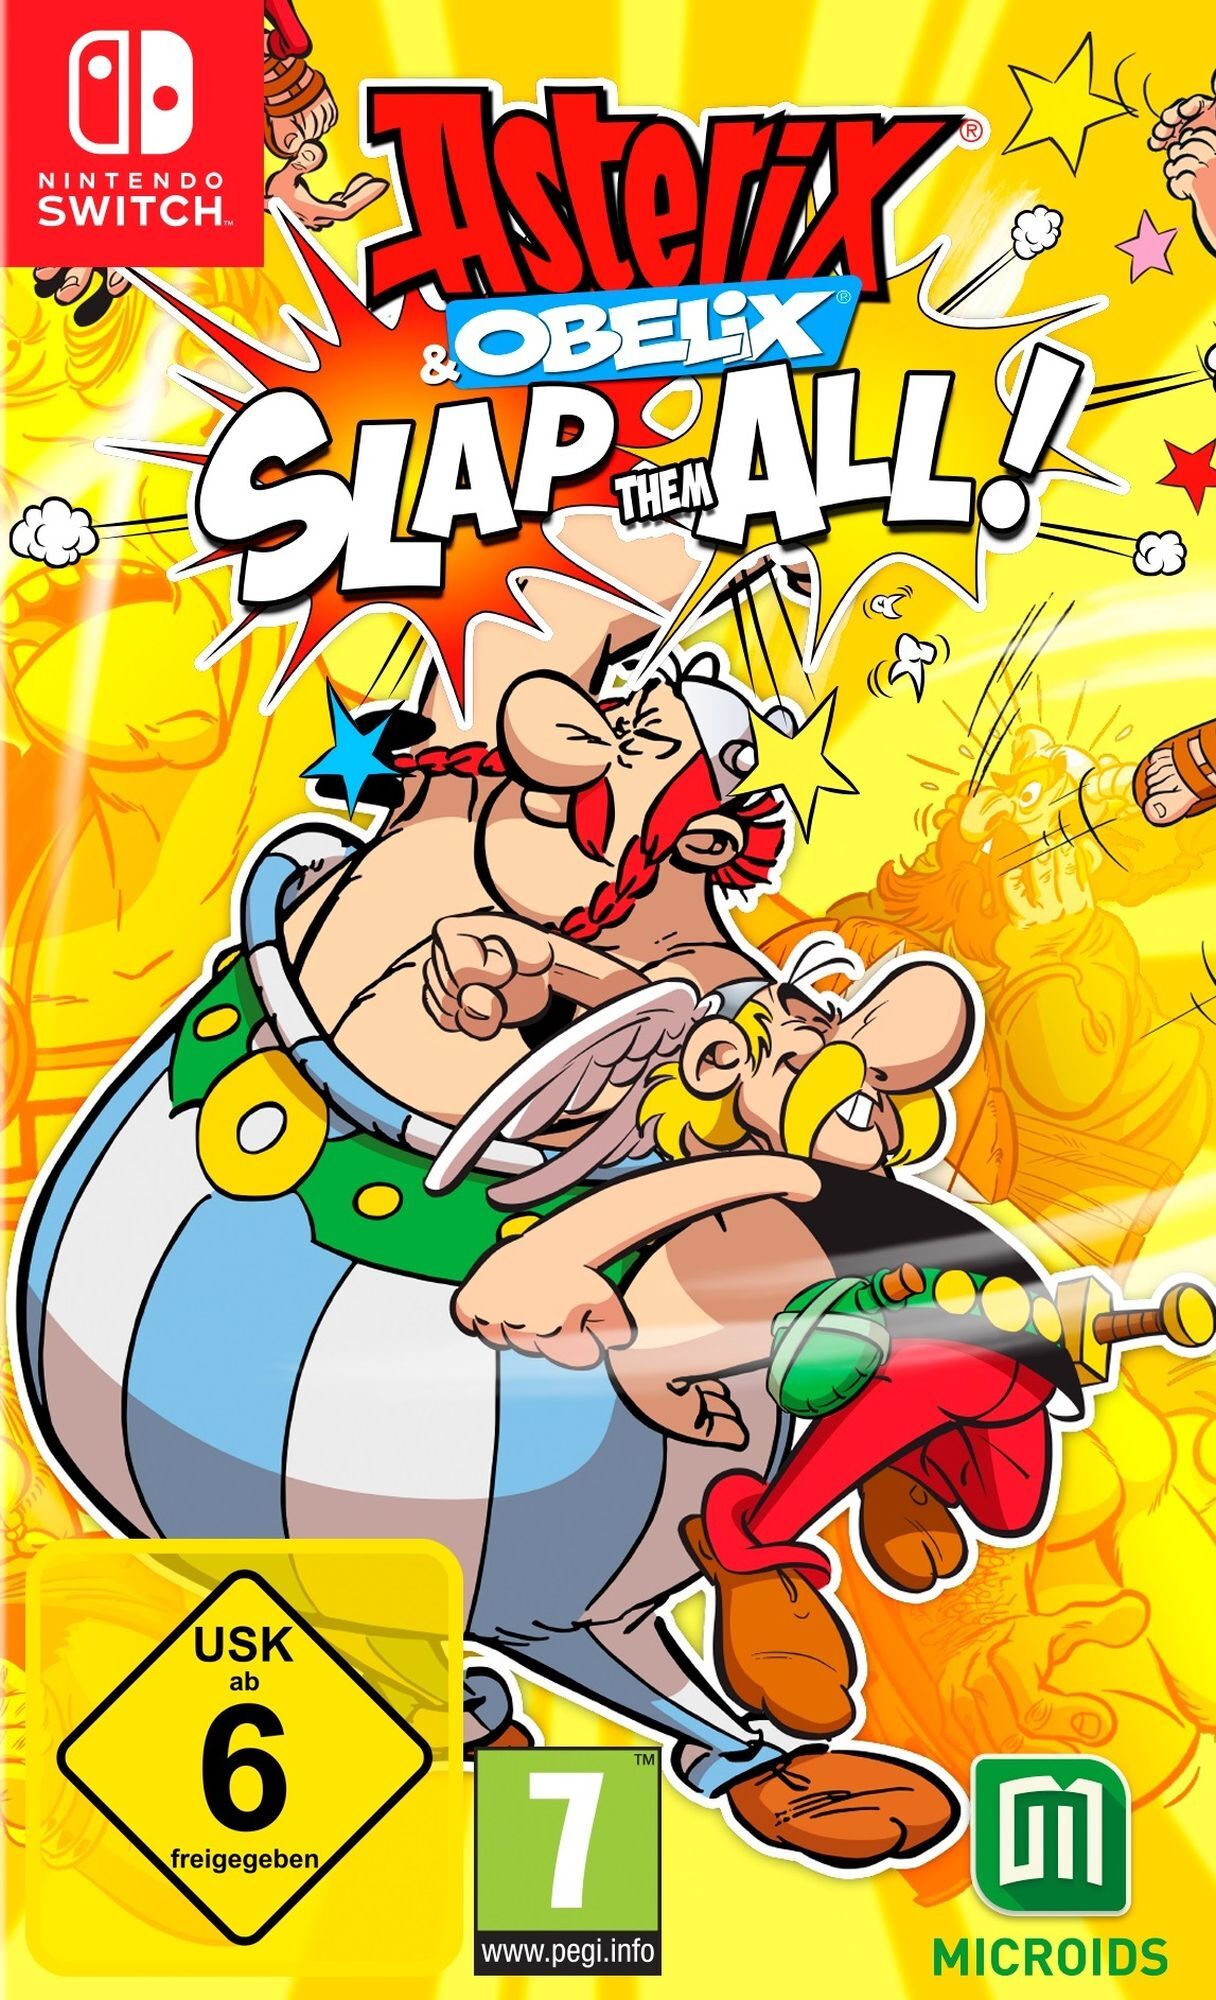 Microids - Asterix + Obelix: Slap Them All! - Limited Edition [NSW] (D)